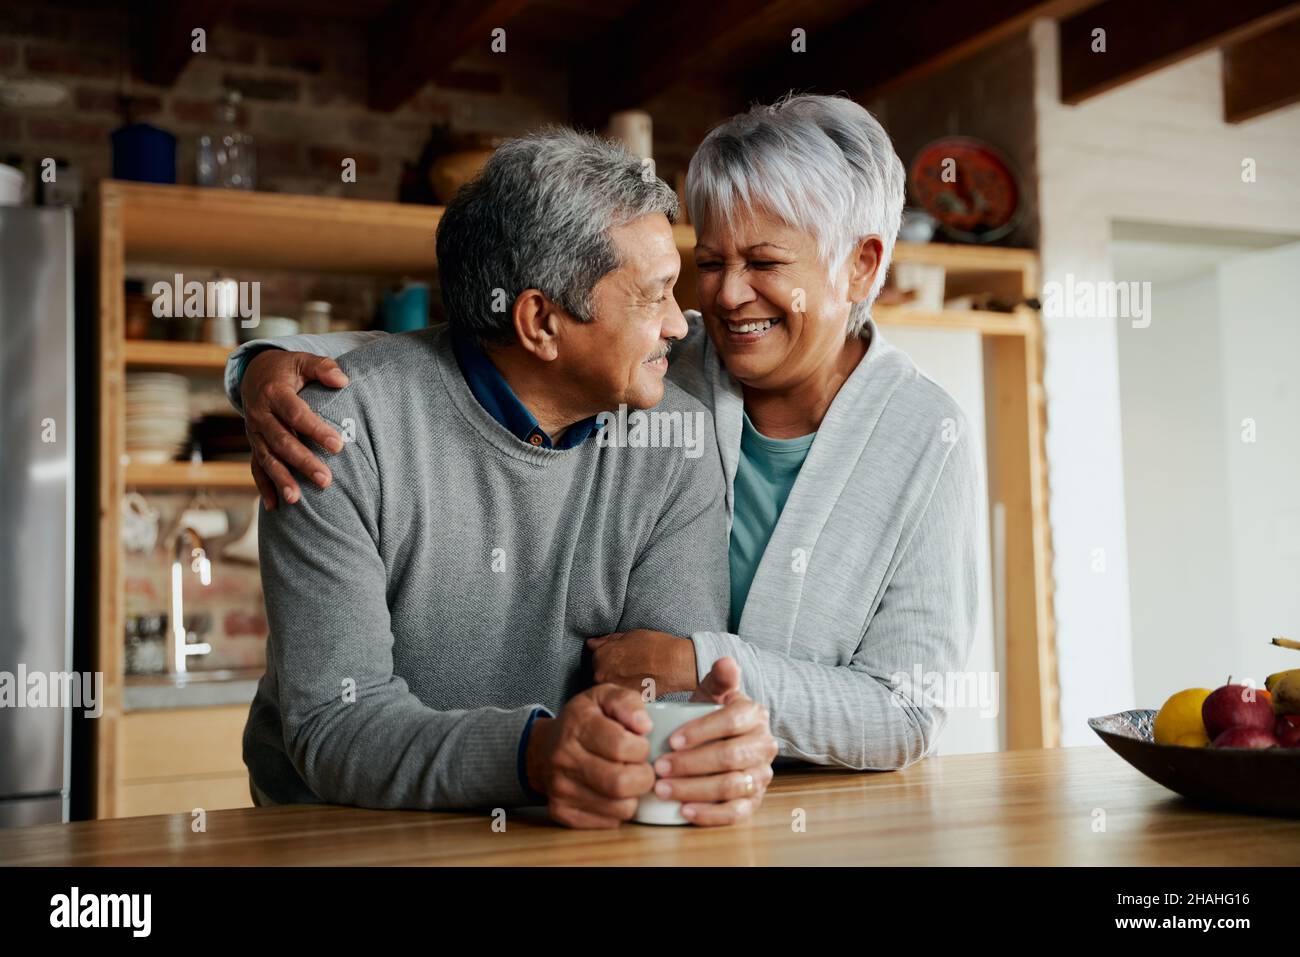 Happily retired elderly biracial couple smiling at each other